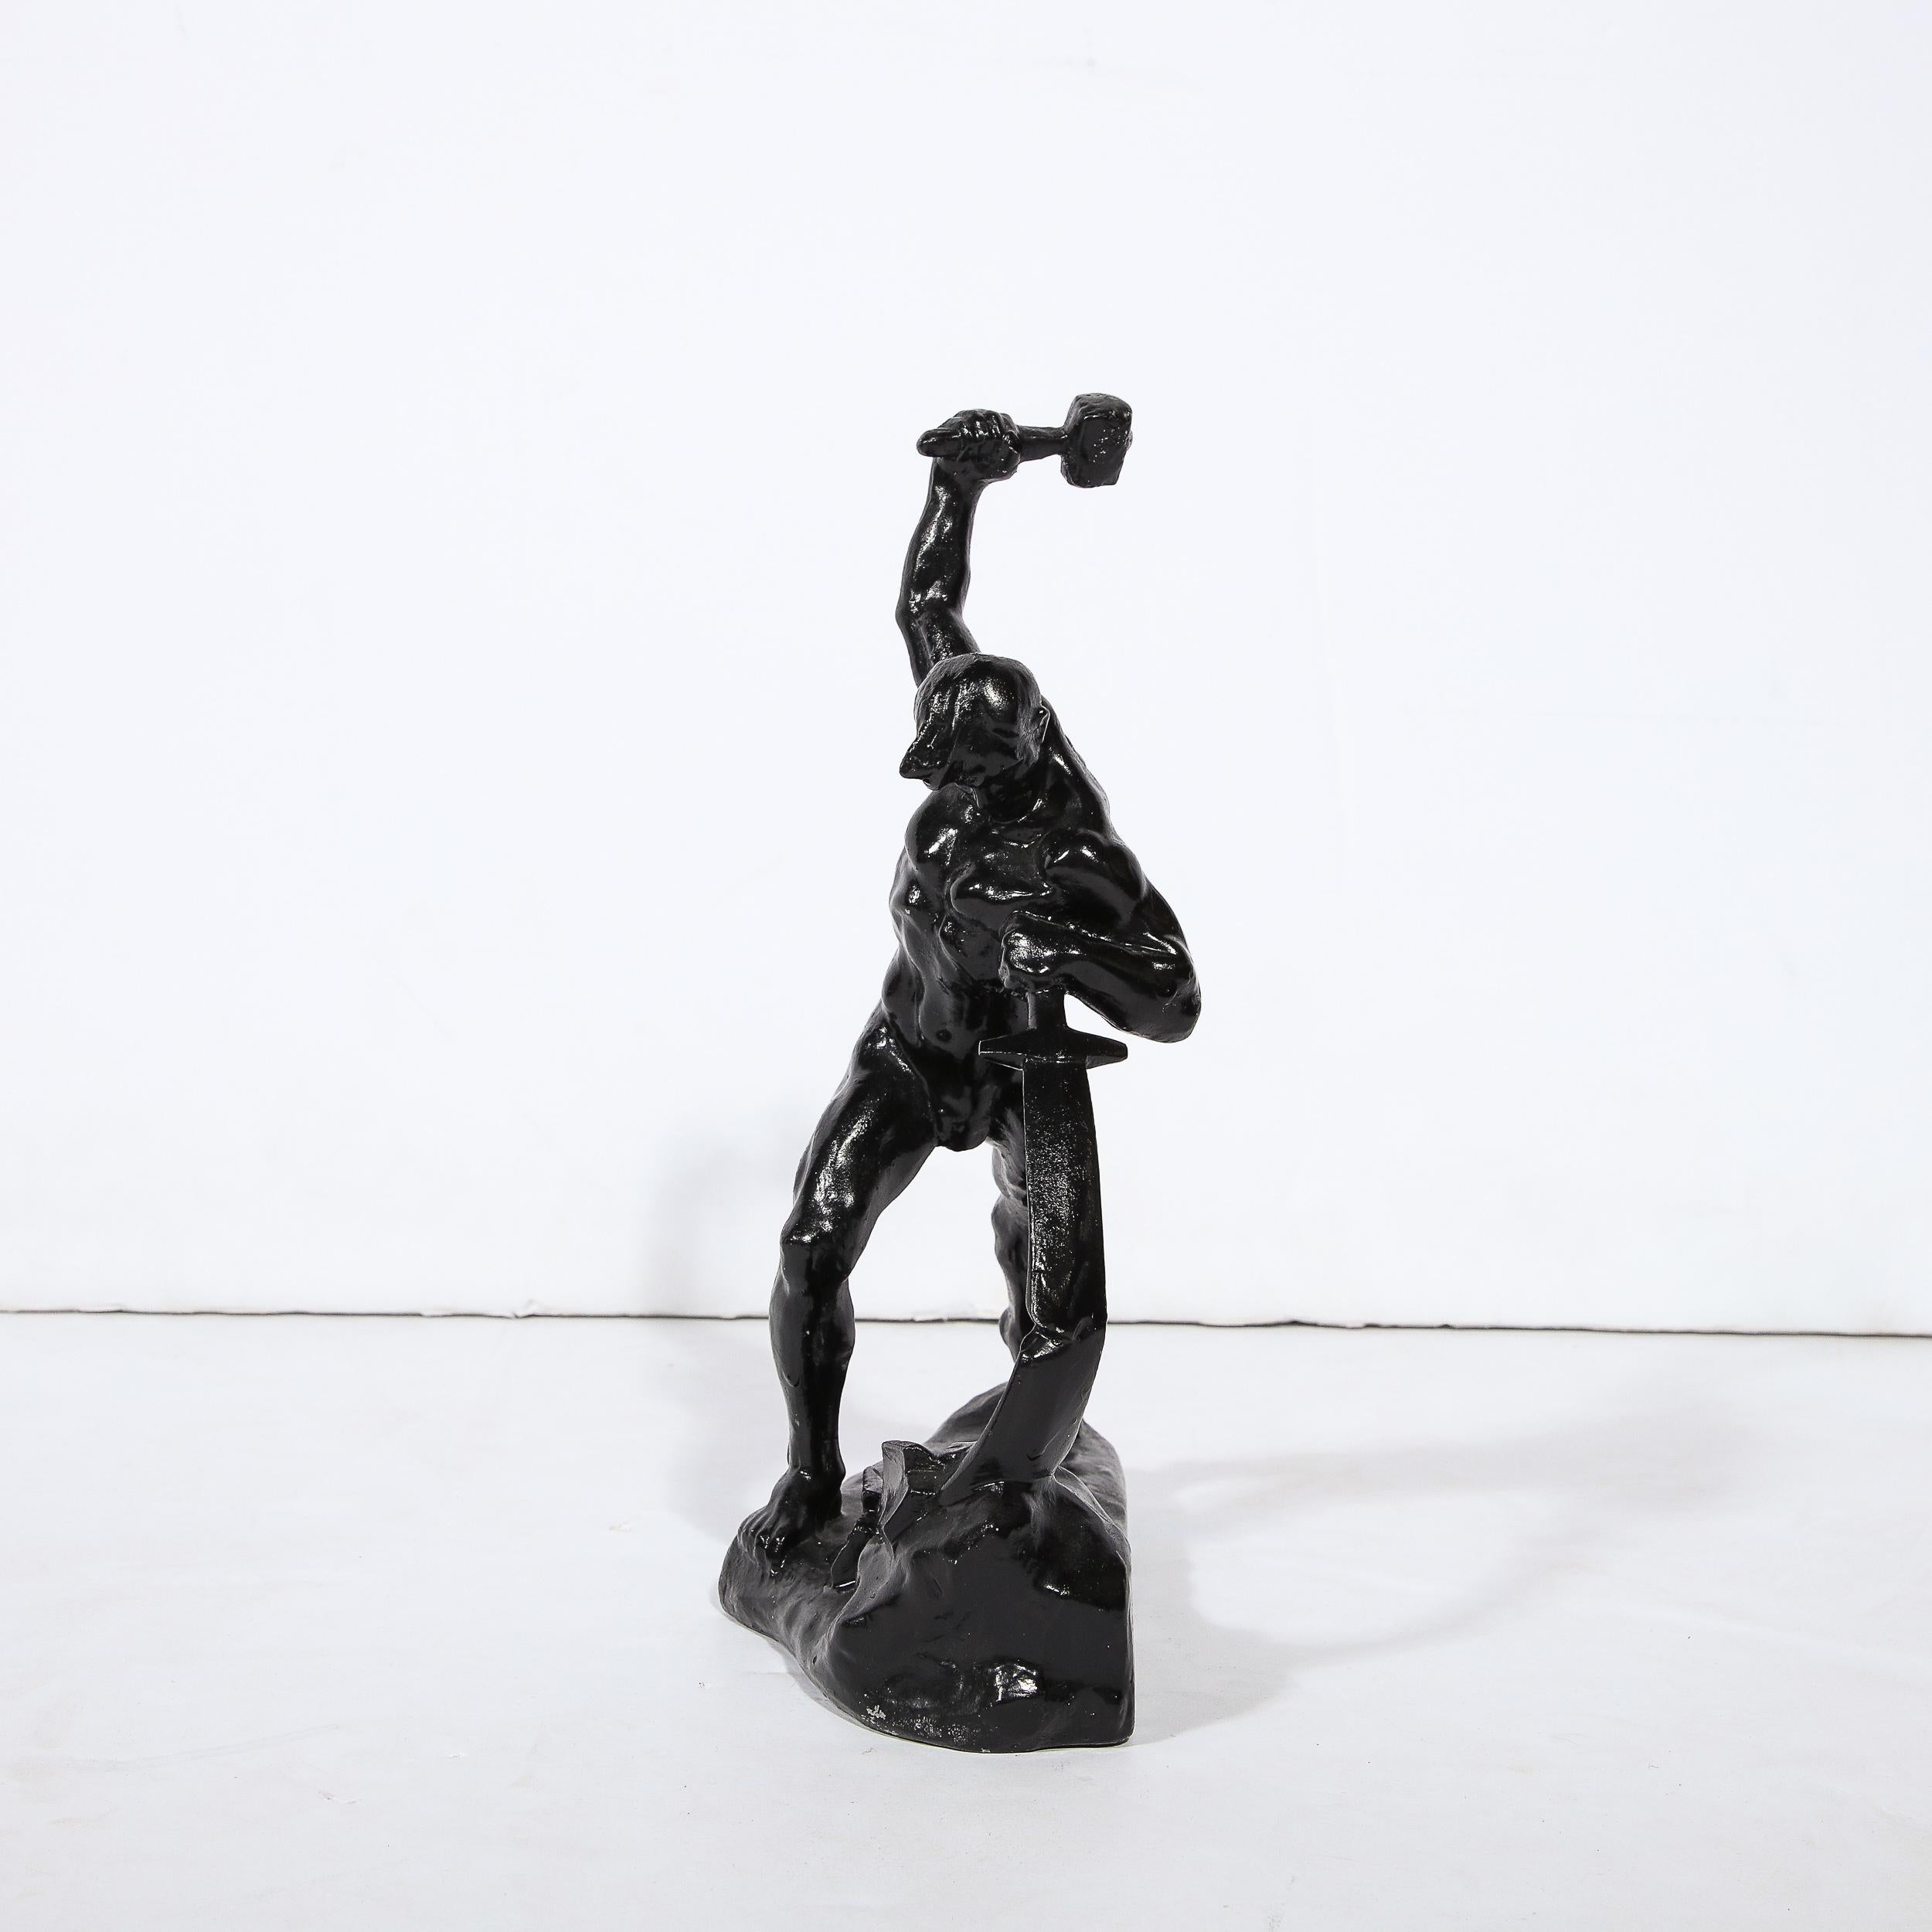 Modernist 20th Century Soviet Russian Nude Male Sculpture in Blackened Bronze In Excellent Condition For Sale In New York, NY